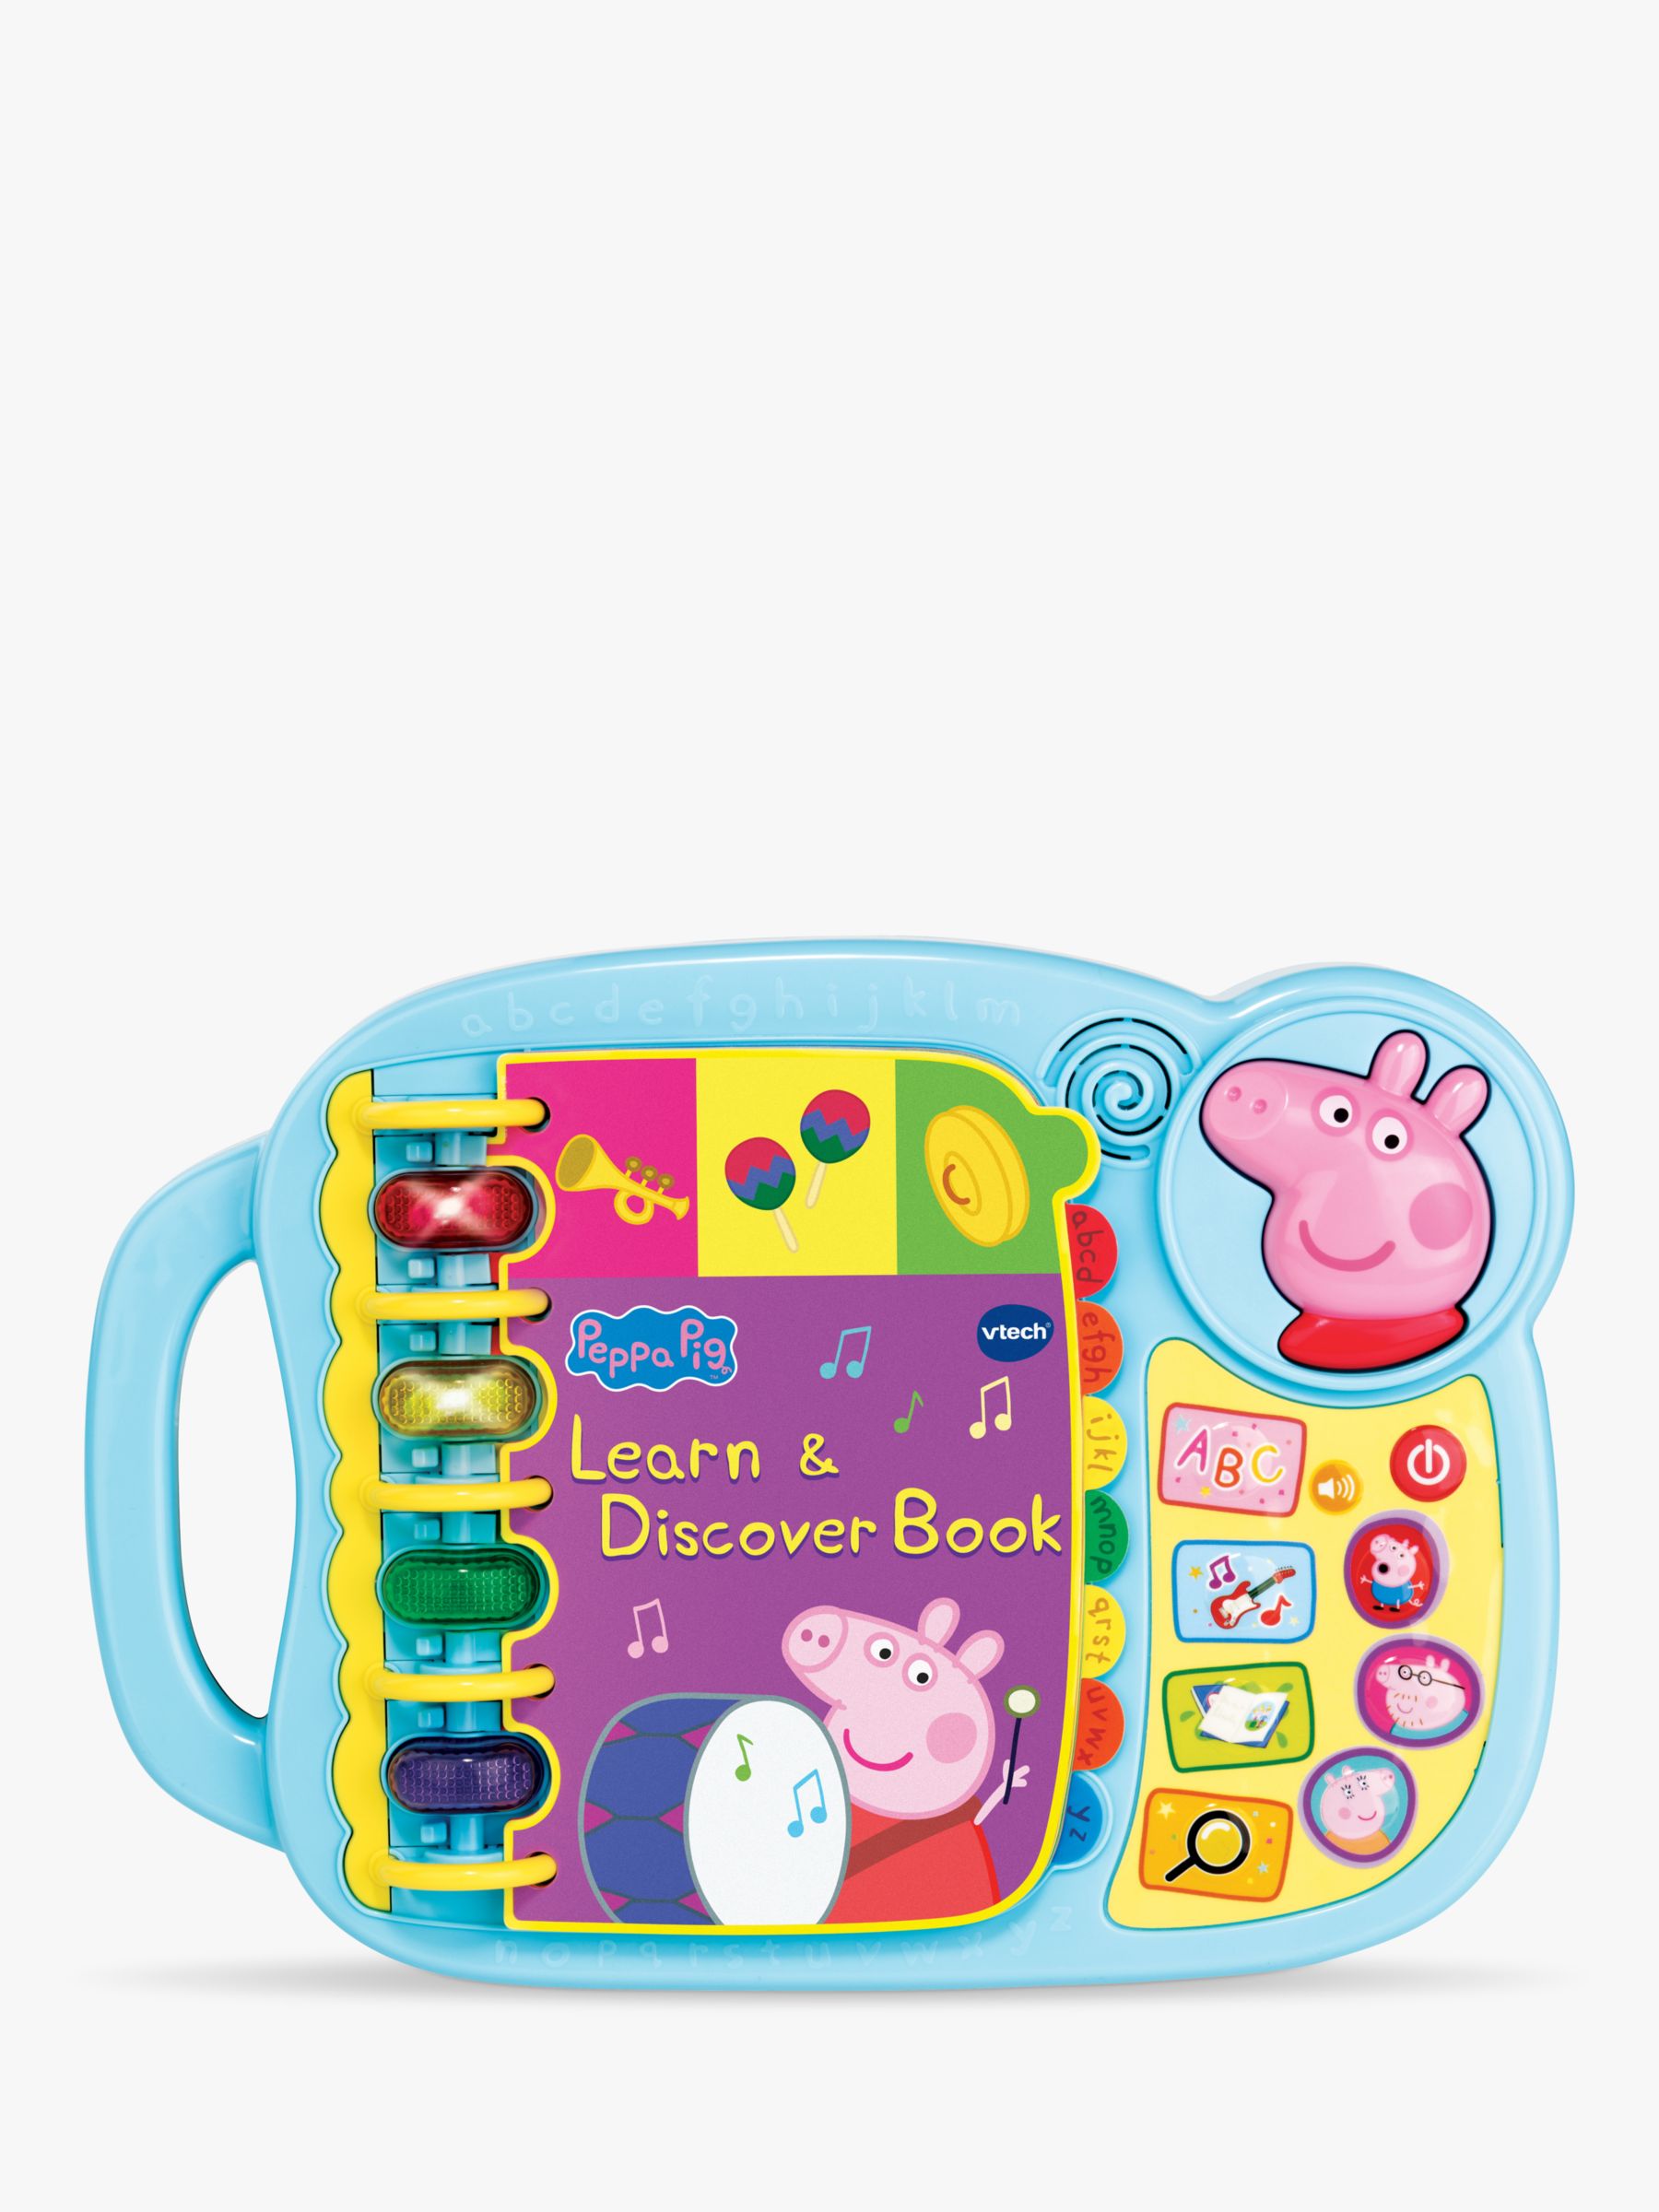 Vtech Peppa Pig Learning Laptop at Toys R Us UK